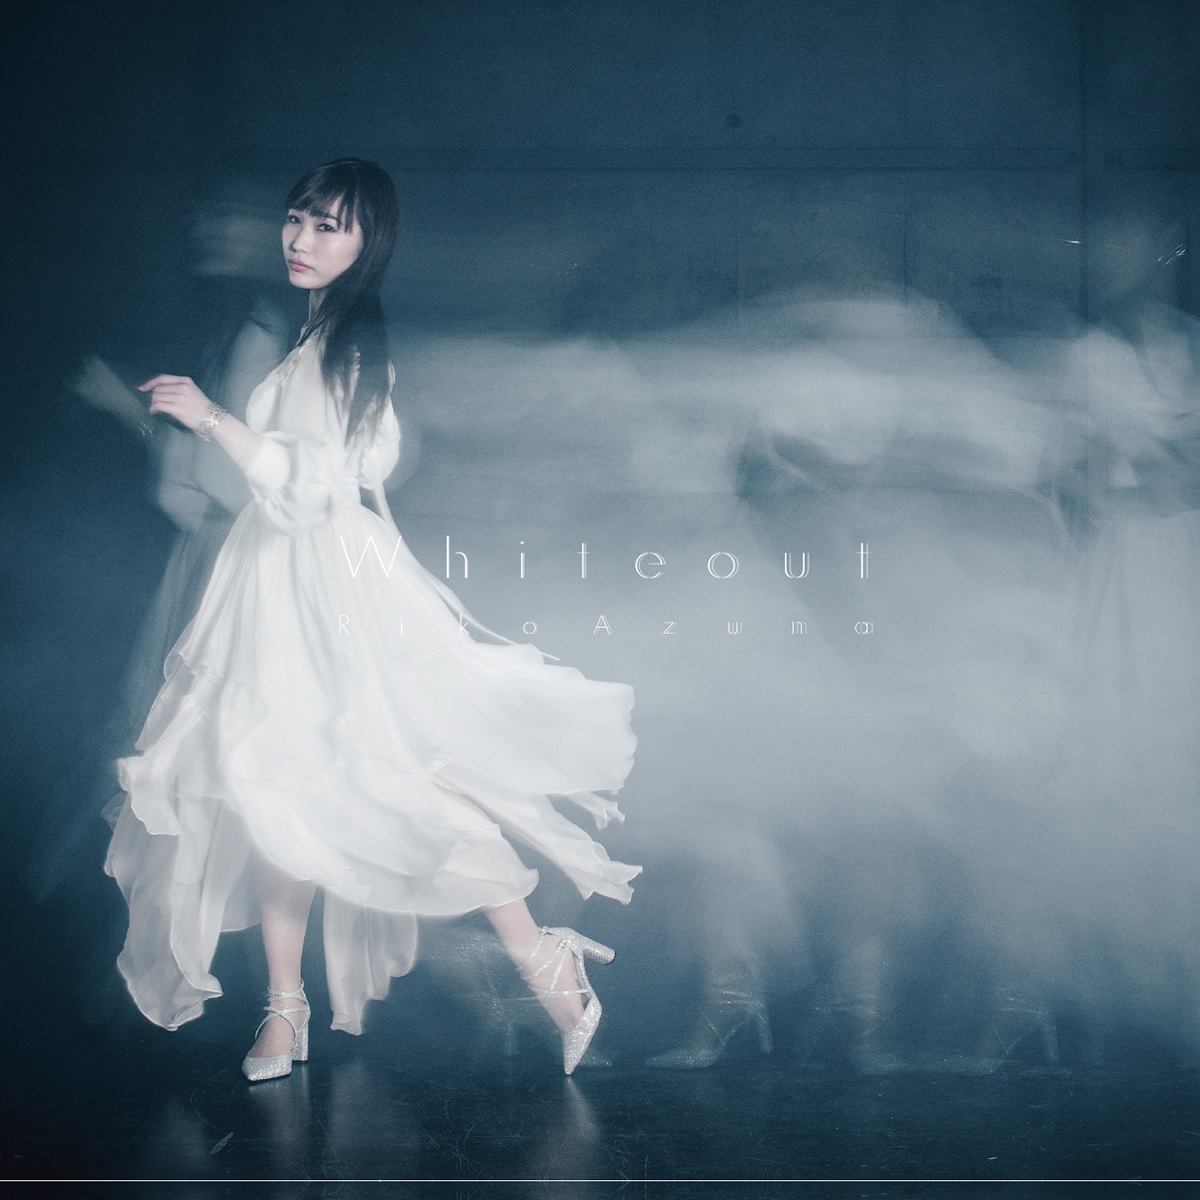 Cover art for『Riko Azuna - Sayonara』from the release『Whiteout』